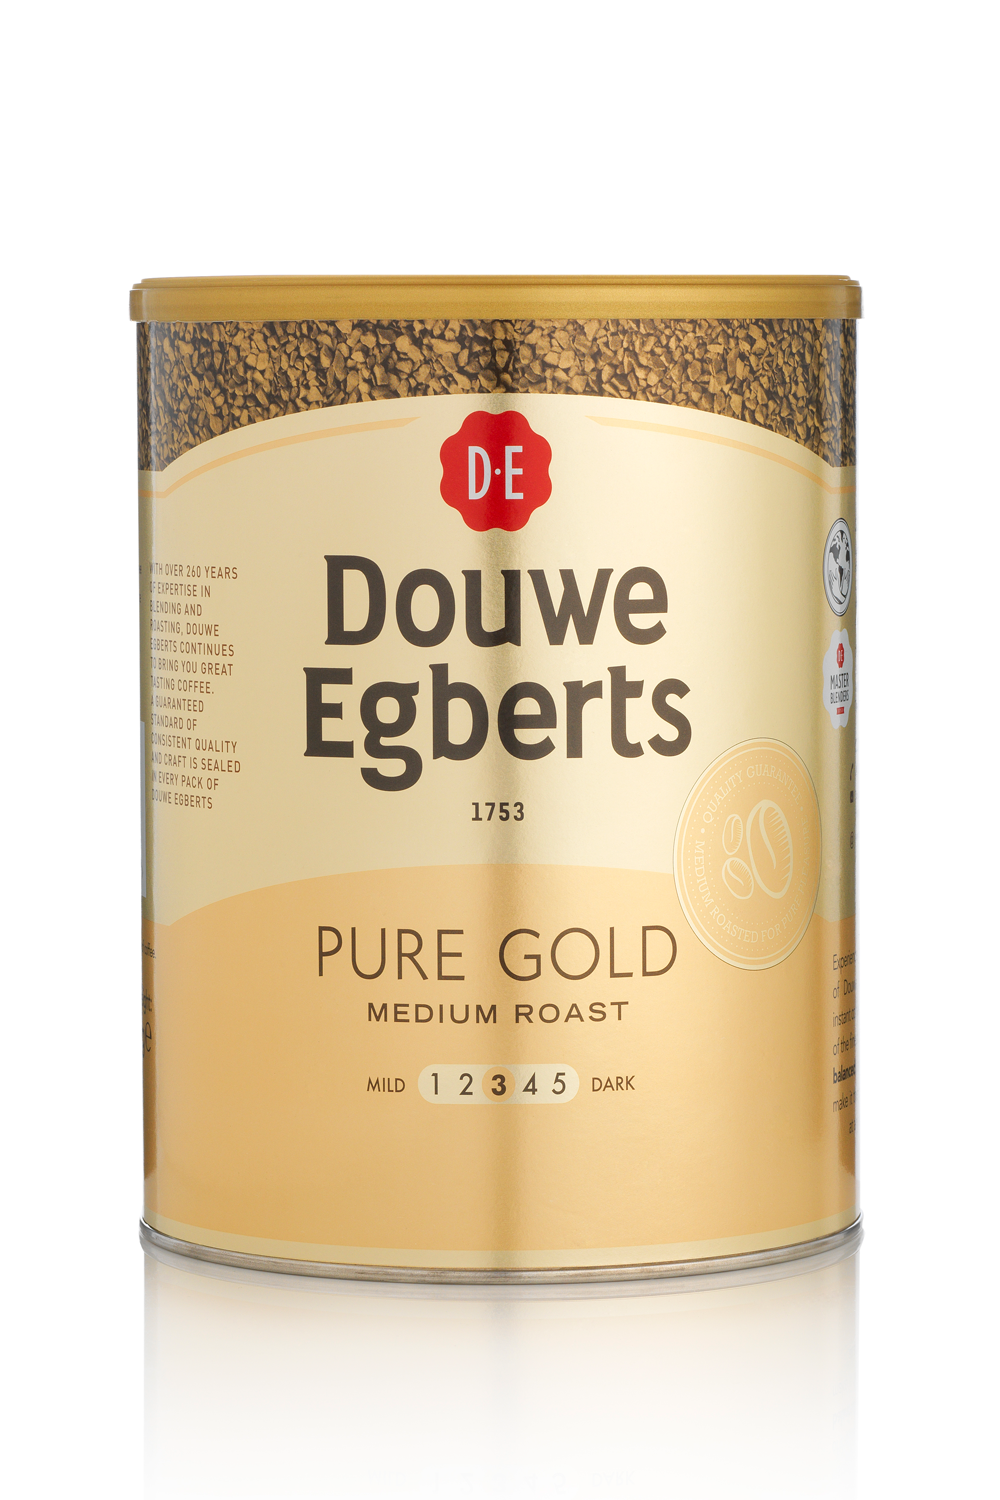 Douwe Egberts Pure Gold Medium Roast instant coffee 750g. A tin for professional use or customers